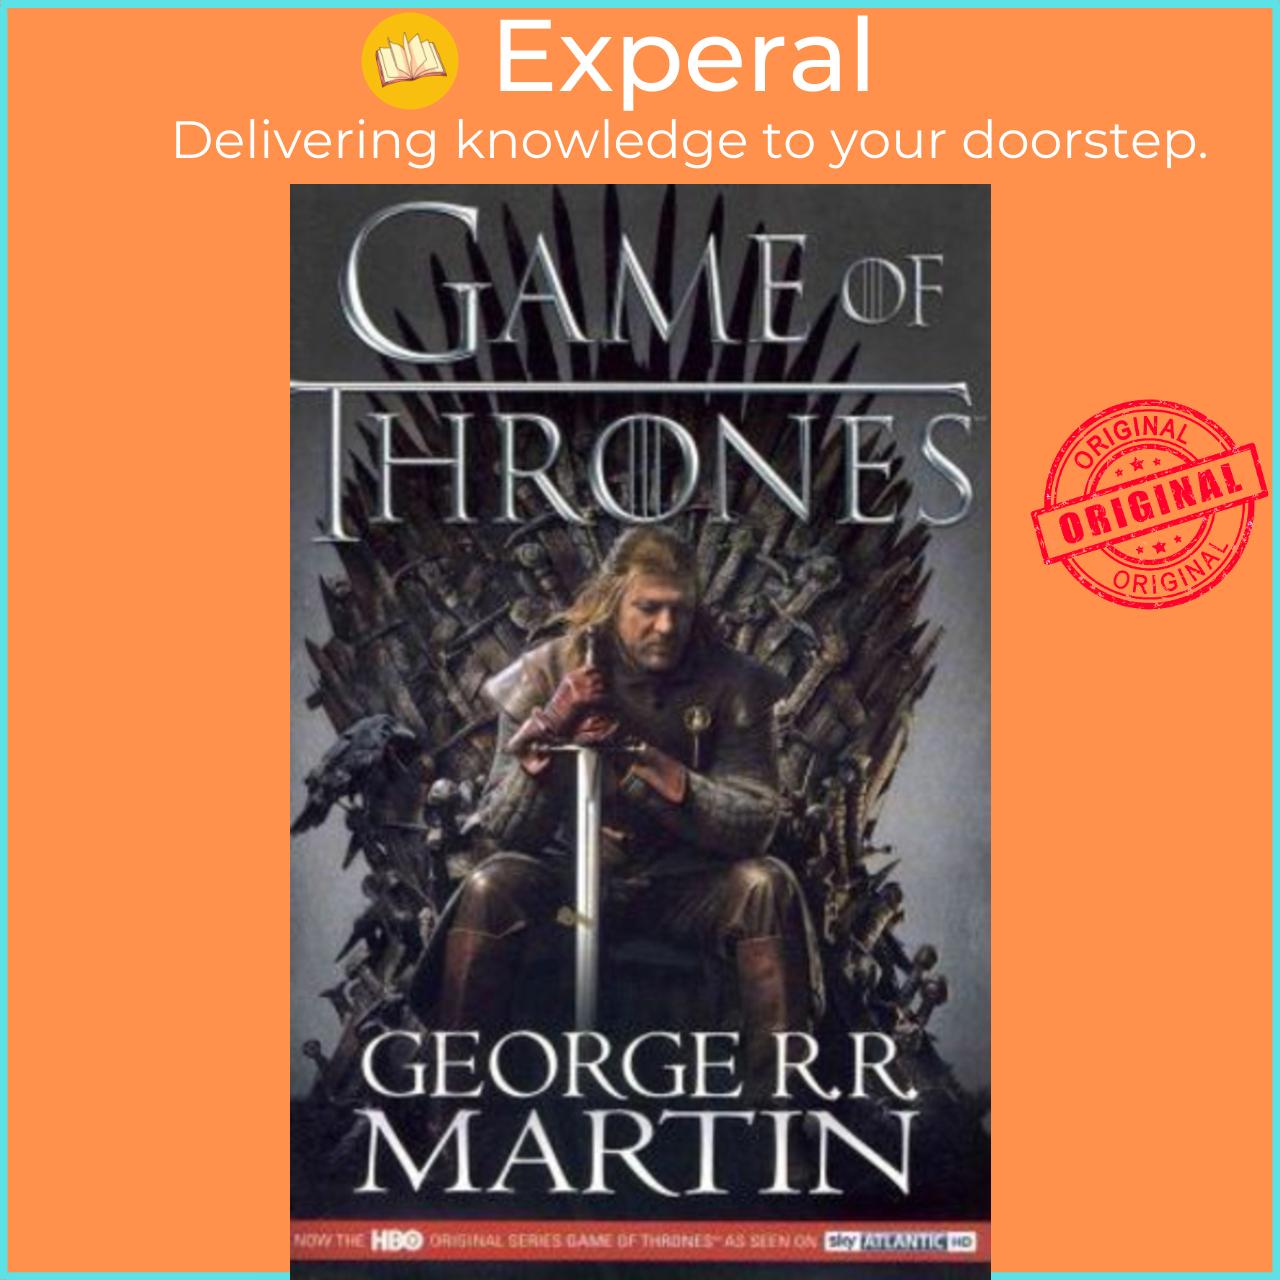 Sách - A Game of Thrones (A Song of Ice and Fire) by George R. R. Martin (UK edition, paperback)